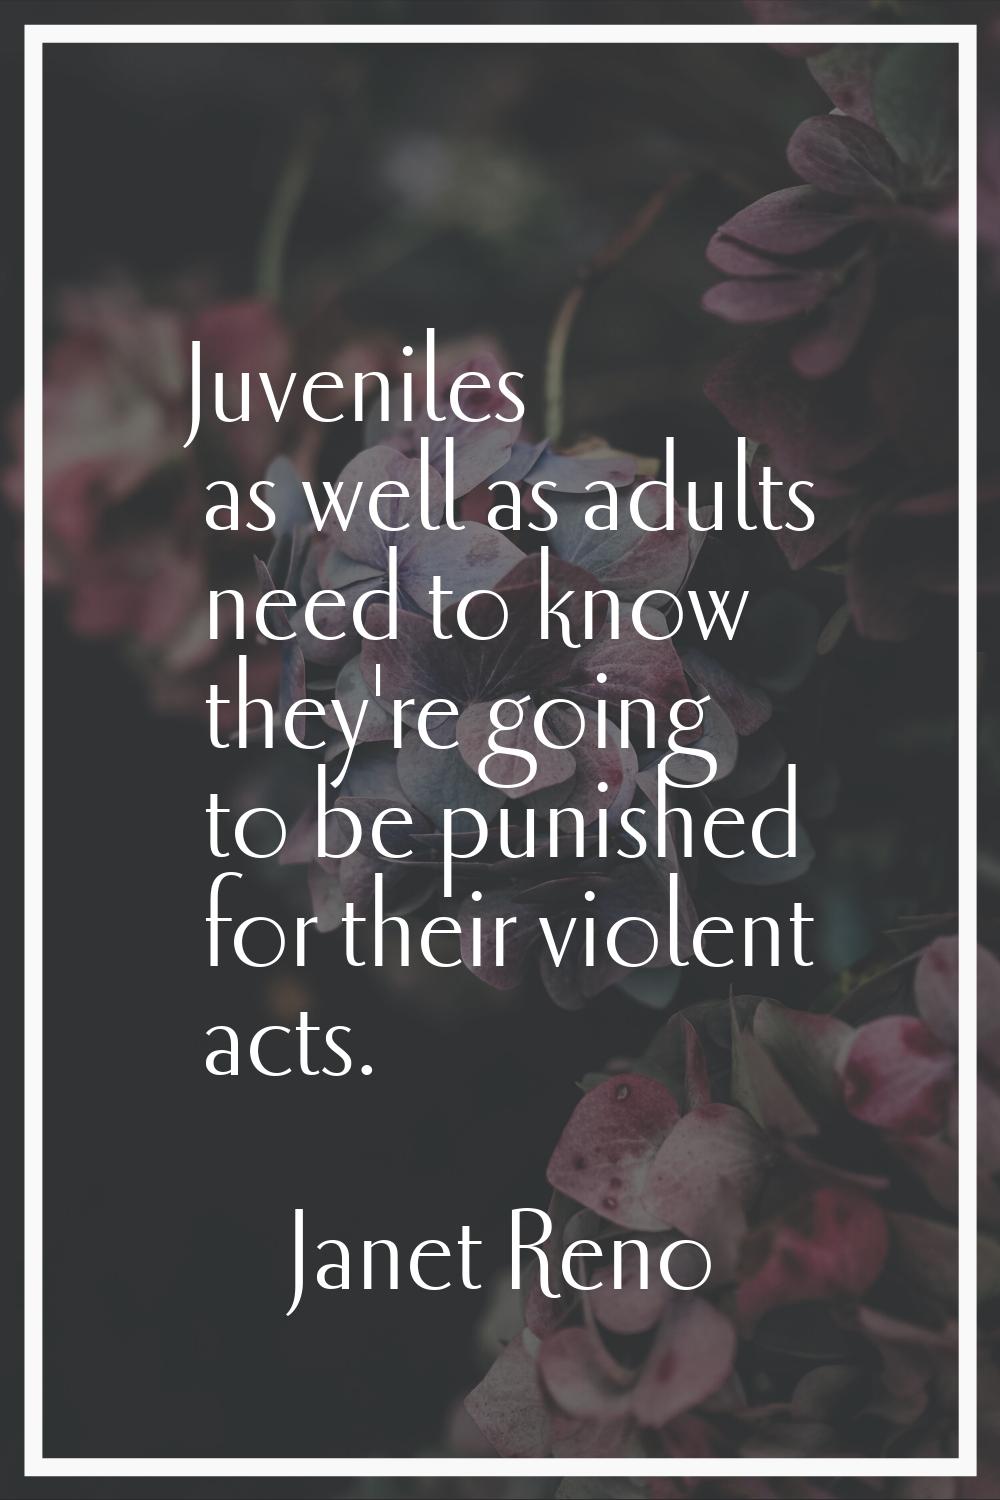 Juveniles as well as adults need to know they're going to be punished for their violent acts.